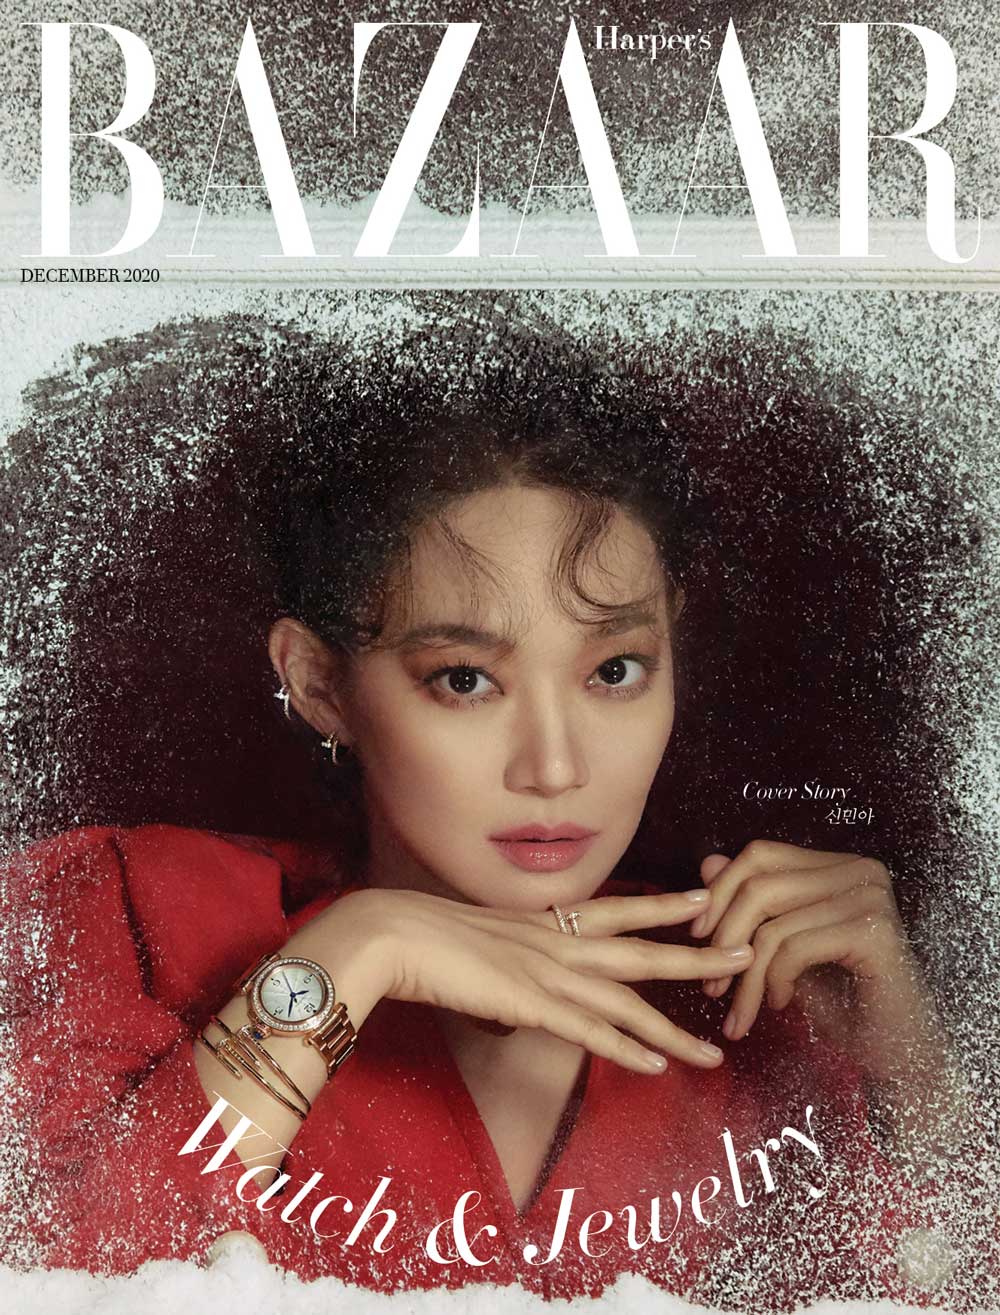 In the fashion magazine Harpers Bazaar, actress Shin Min-as lovely holiday cover and pictorial were released.Shin Min-a presented a fashion photo shoot with TVB Anniversary Awards in the December issue of Harpers Bazaar, a fashion magazine published on the 20th.The unique lovely smile completed the result of being happy just by matching the pictorial concept of Min-a Santa.The scene atmosphere was very warm thanks to Shin Min-a, who did not lose his smile even after shooting until late at night.In an interview after the filming, Shin Min-a said, Everything is hard, but I still have energy because I enjoyed work.It is fun to shoot so long and shoot so much all the time.I am changing every day, I am never the same as yesterday, and the world changes as much as I change every day, so the same result can not come out.So it is always new and fun, he said.When asked about the TVB Anniversary Awards plan with acquaintances, he said, The TVB Anniversary Awards plan has not been set up at all.Movie Diva just opened, and there is one more work to be released in the future. Nowadays, things change from time to time, so I can not plan in advance.If things get better, I hope TVB Anniversary Awards will have a place to eat with family and friends. I dont need to do anything special.He also added a story about the upcoming Movie Leave, a fantasy human drama about the story of a dead mother coming to her daughters side for three days.Ive seen a lot of stories about my daughter and my mother, but I think I want to keep seeing them.Im not sure why Movies feelings are so sad that it feels so sad, so its a movie that everyone can relate to.As for the testimony of finishing this year, It seems to have been the same suffering given to everyone, and I lived in a small way looking for the streets that can heal in it.If I asked her how she was doing in the past, I thought Id do something this year, so I asked her how she was doing.It seems to have been a year to think about the people close to them and take care of them. Meanwhile, interviews with the pictorial with Shin Min-a can be found in the December issue of Harpers Bazaar, website and Instagram.Photo = Harpers Bazaar Korea